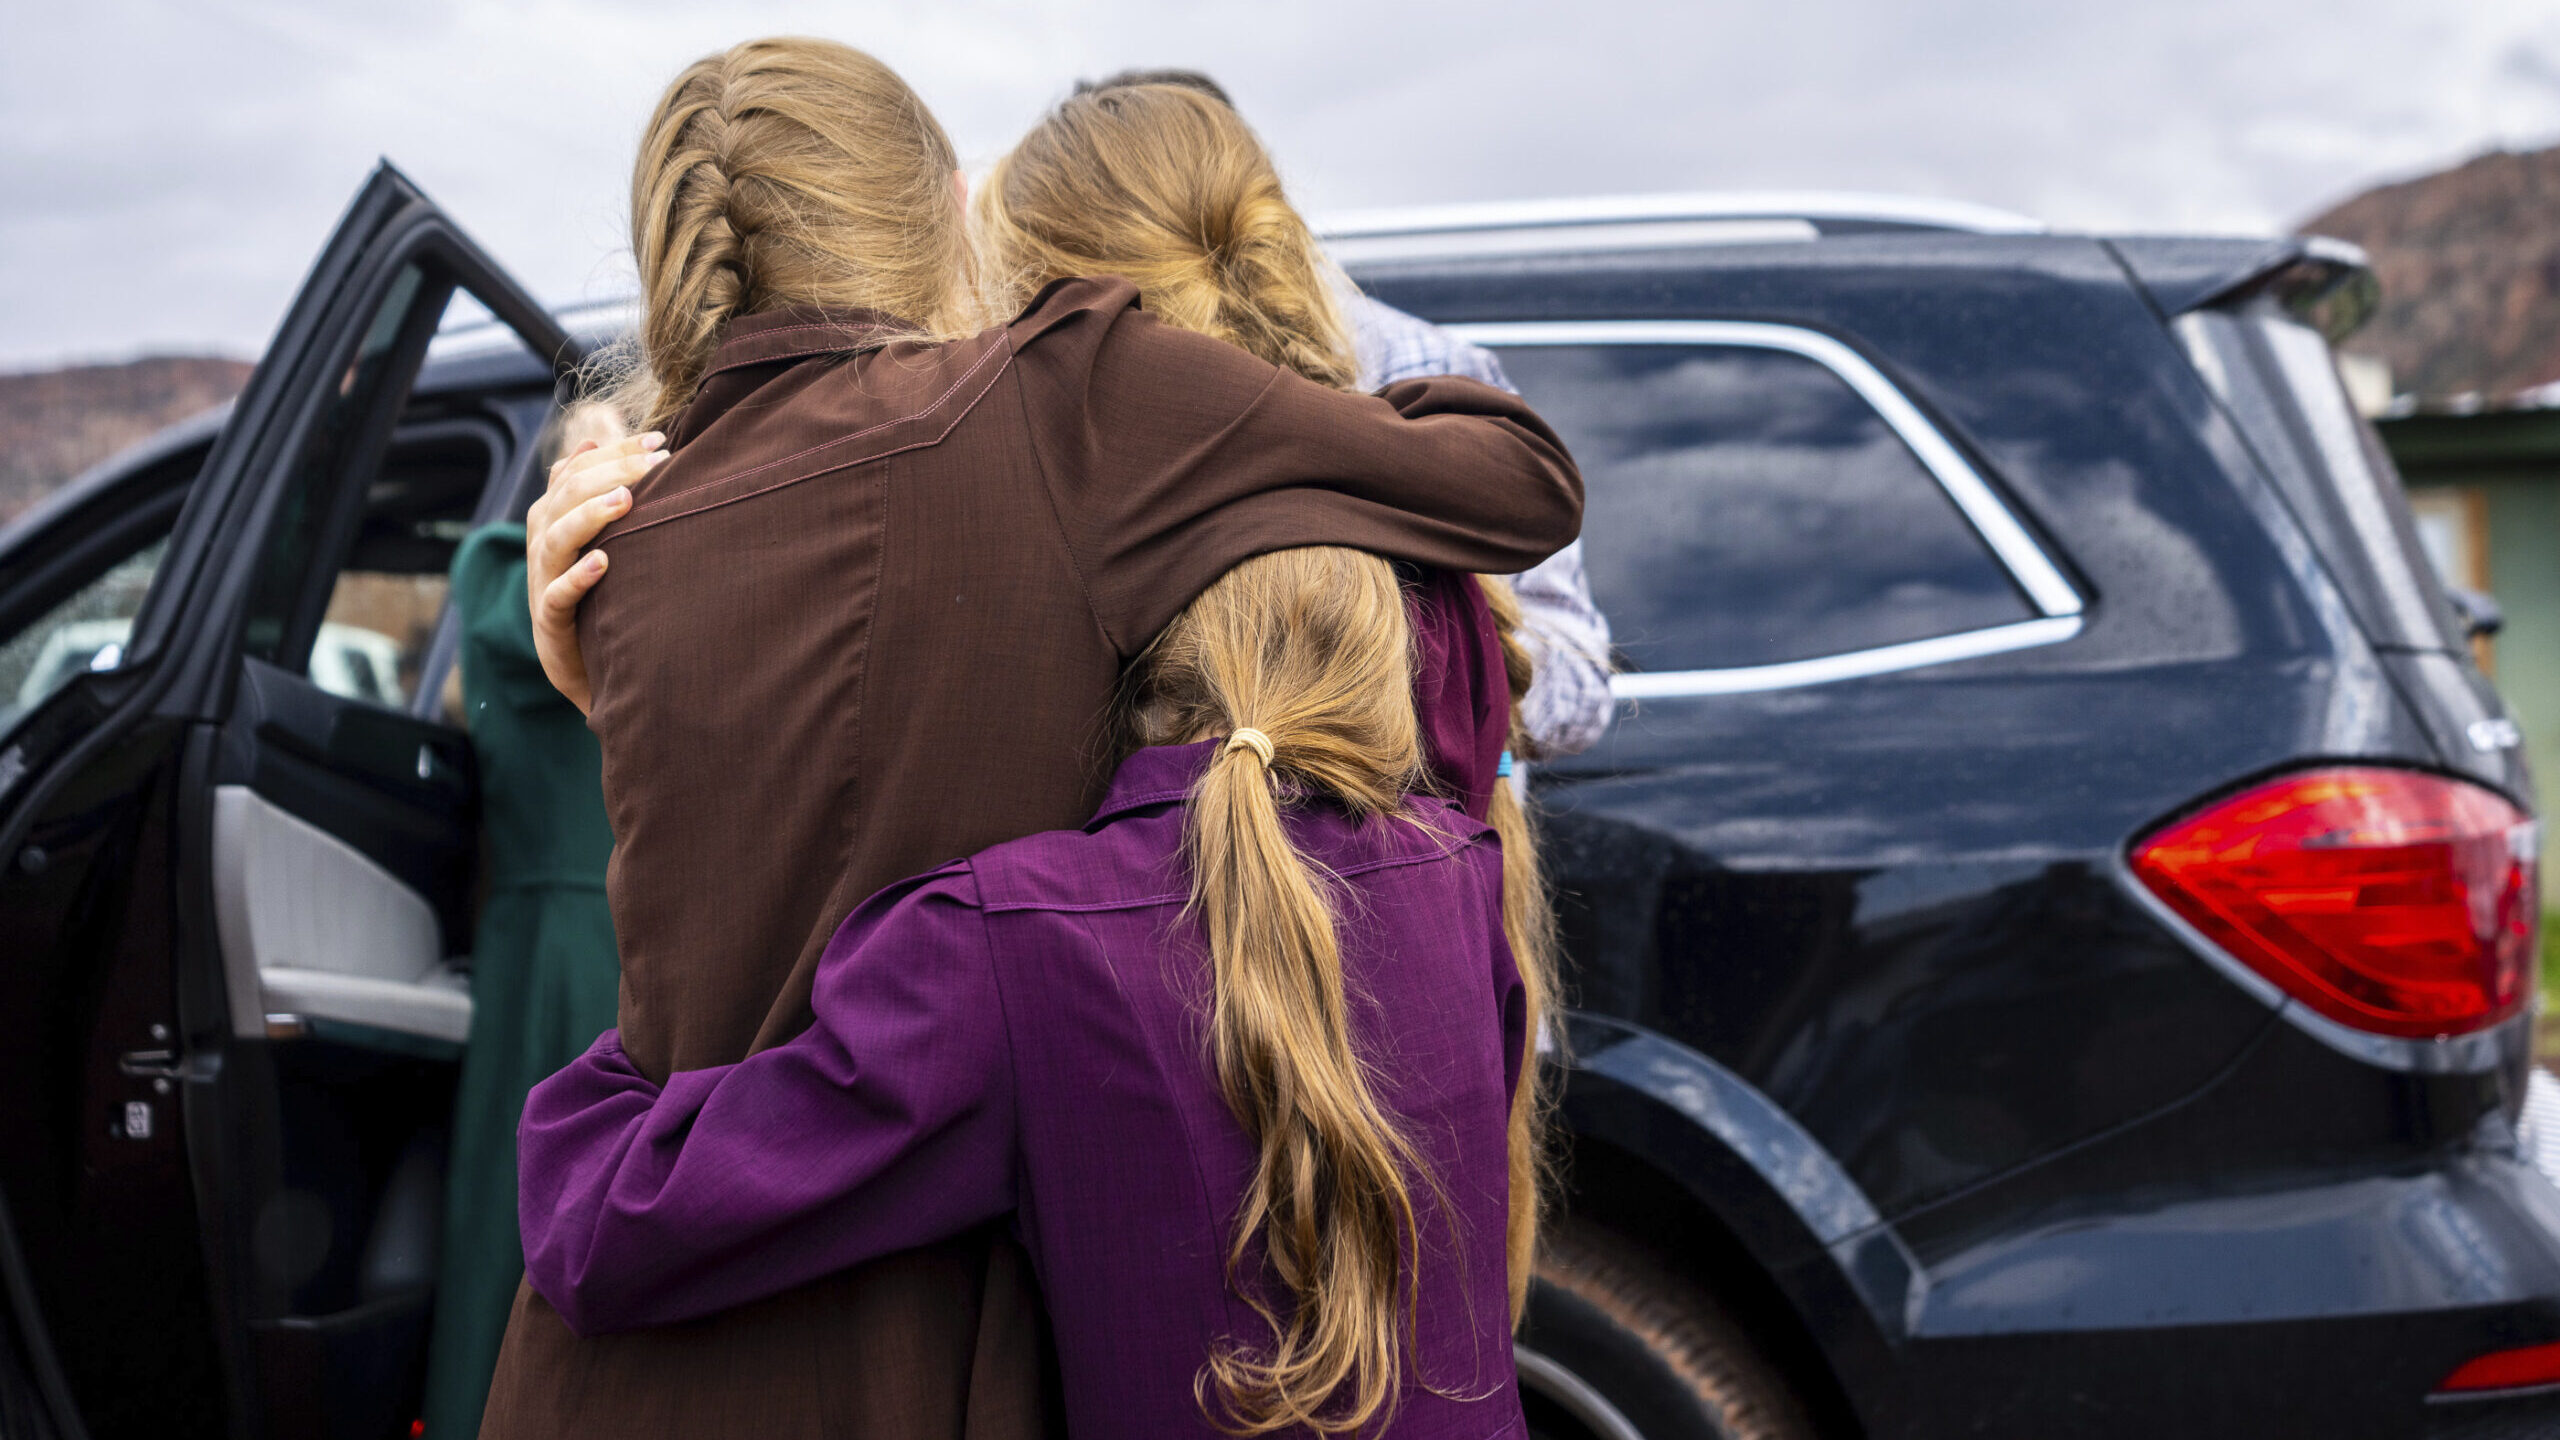 Members of a small polygamous group accused of child sex abuse of underage girls who the group's le...